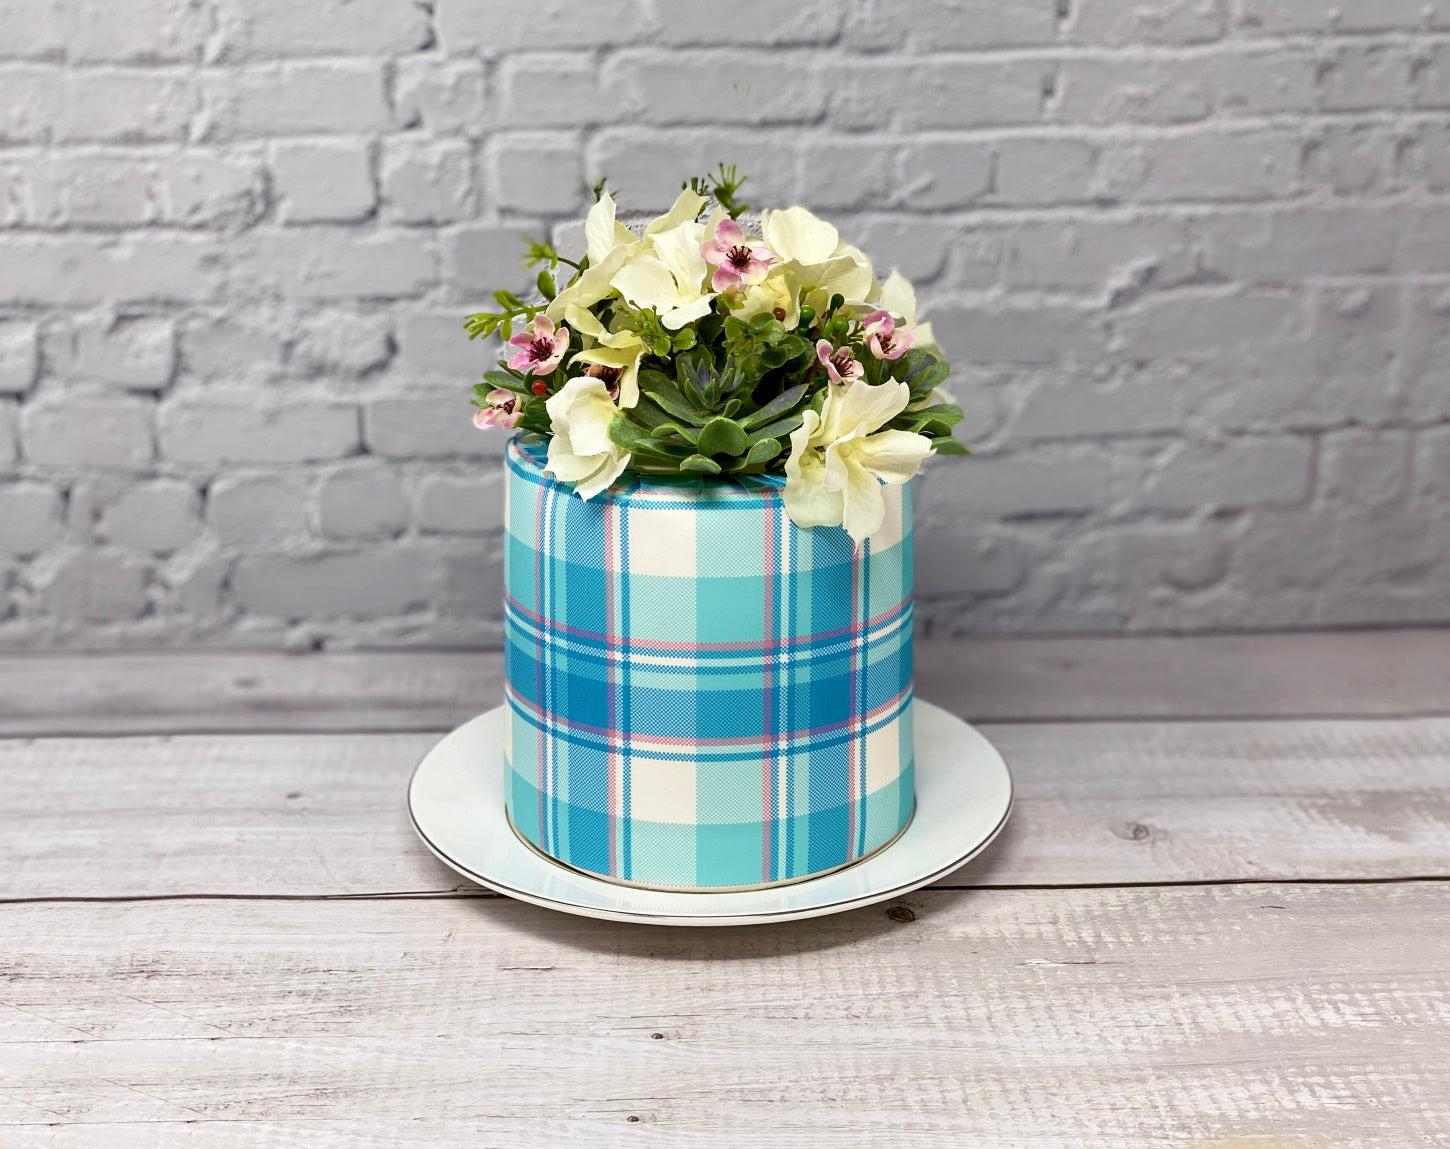 Aqua and pink icing cake wrap with a floral arrangement on top